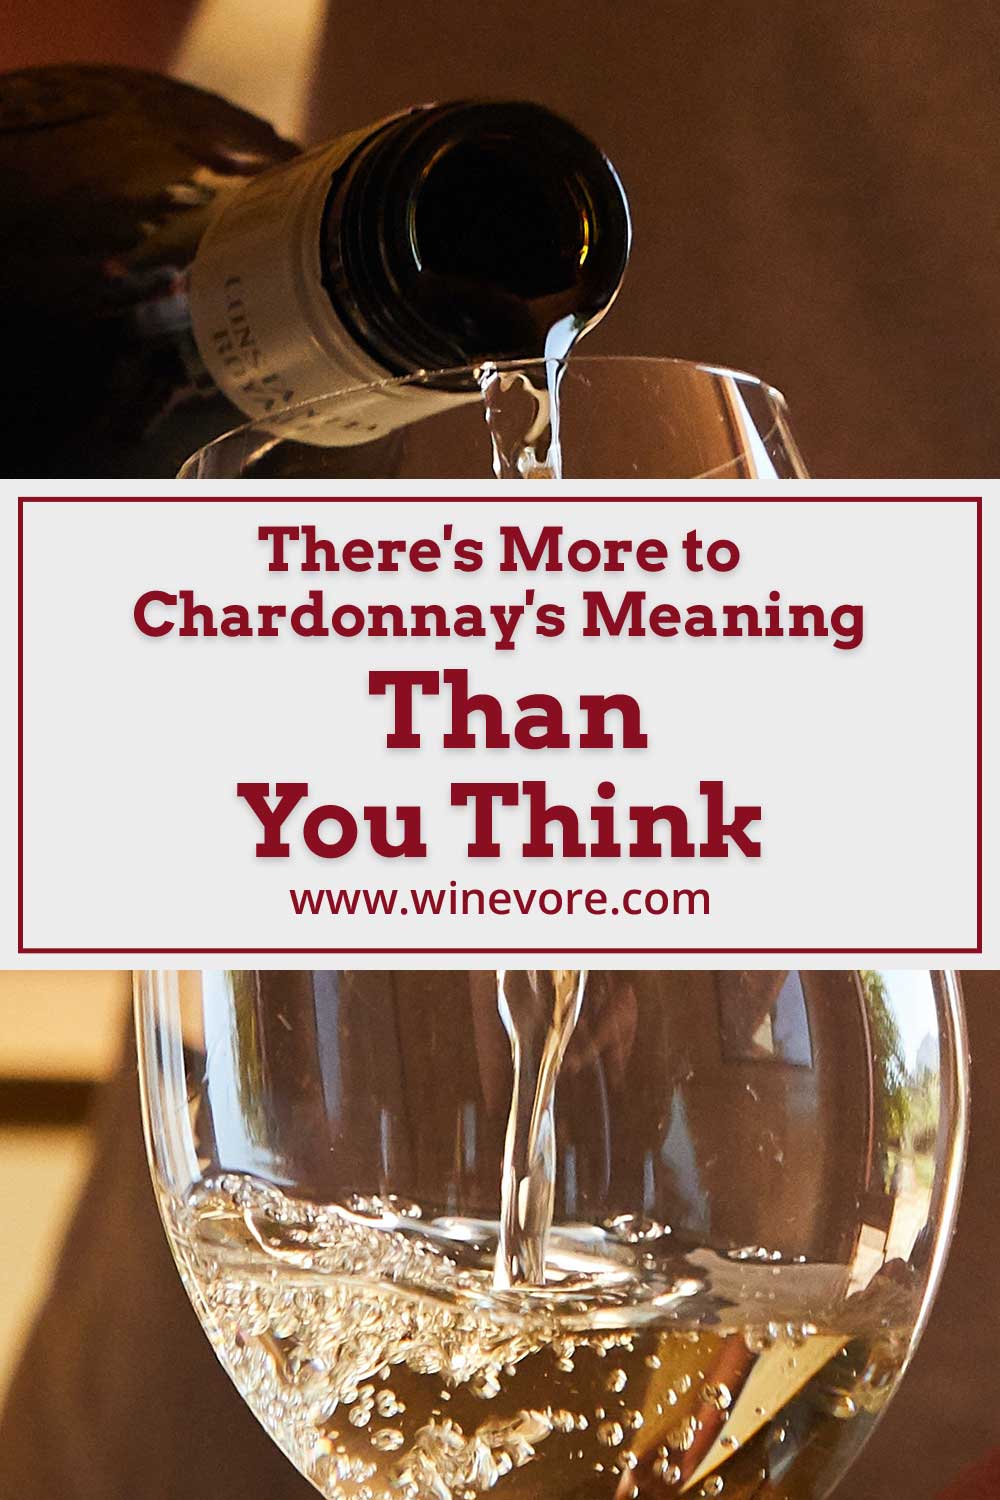 Pouring white wine into a glass - There's More to Chardonnay's Meaning Than You Think.